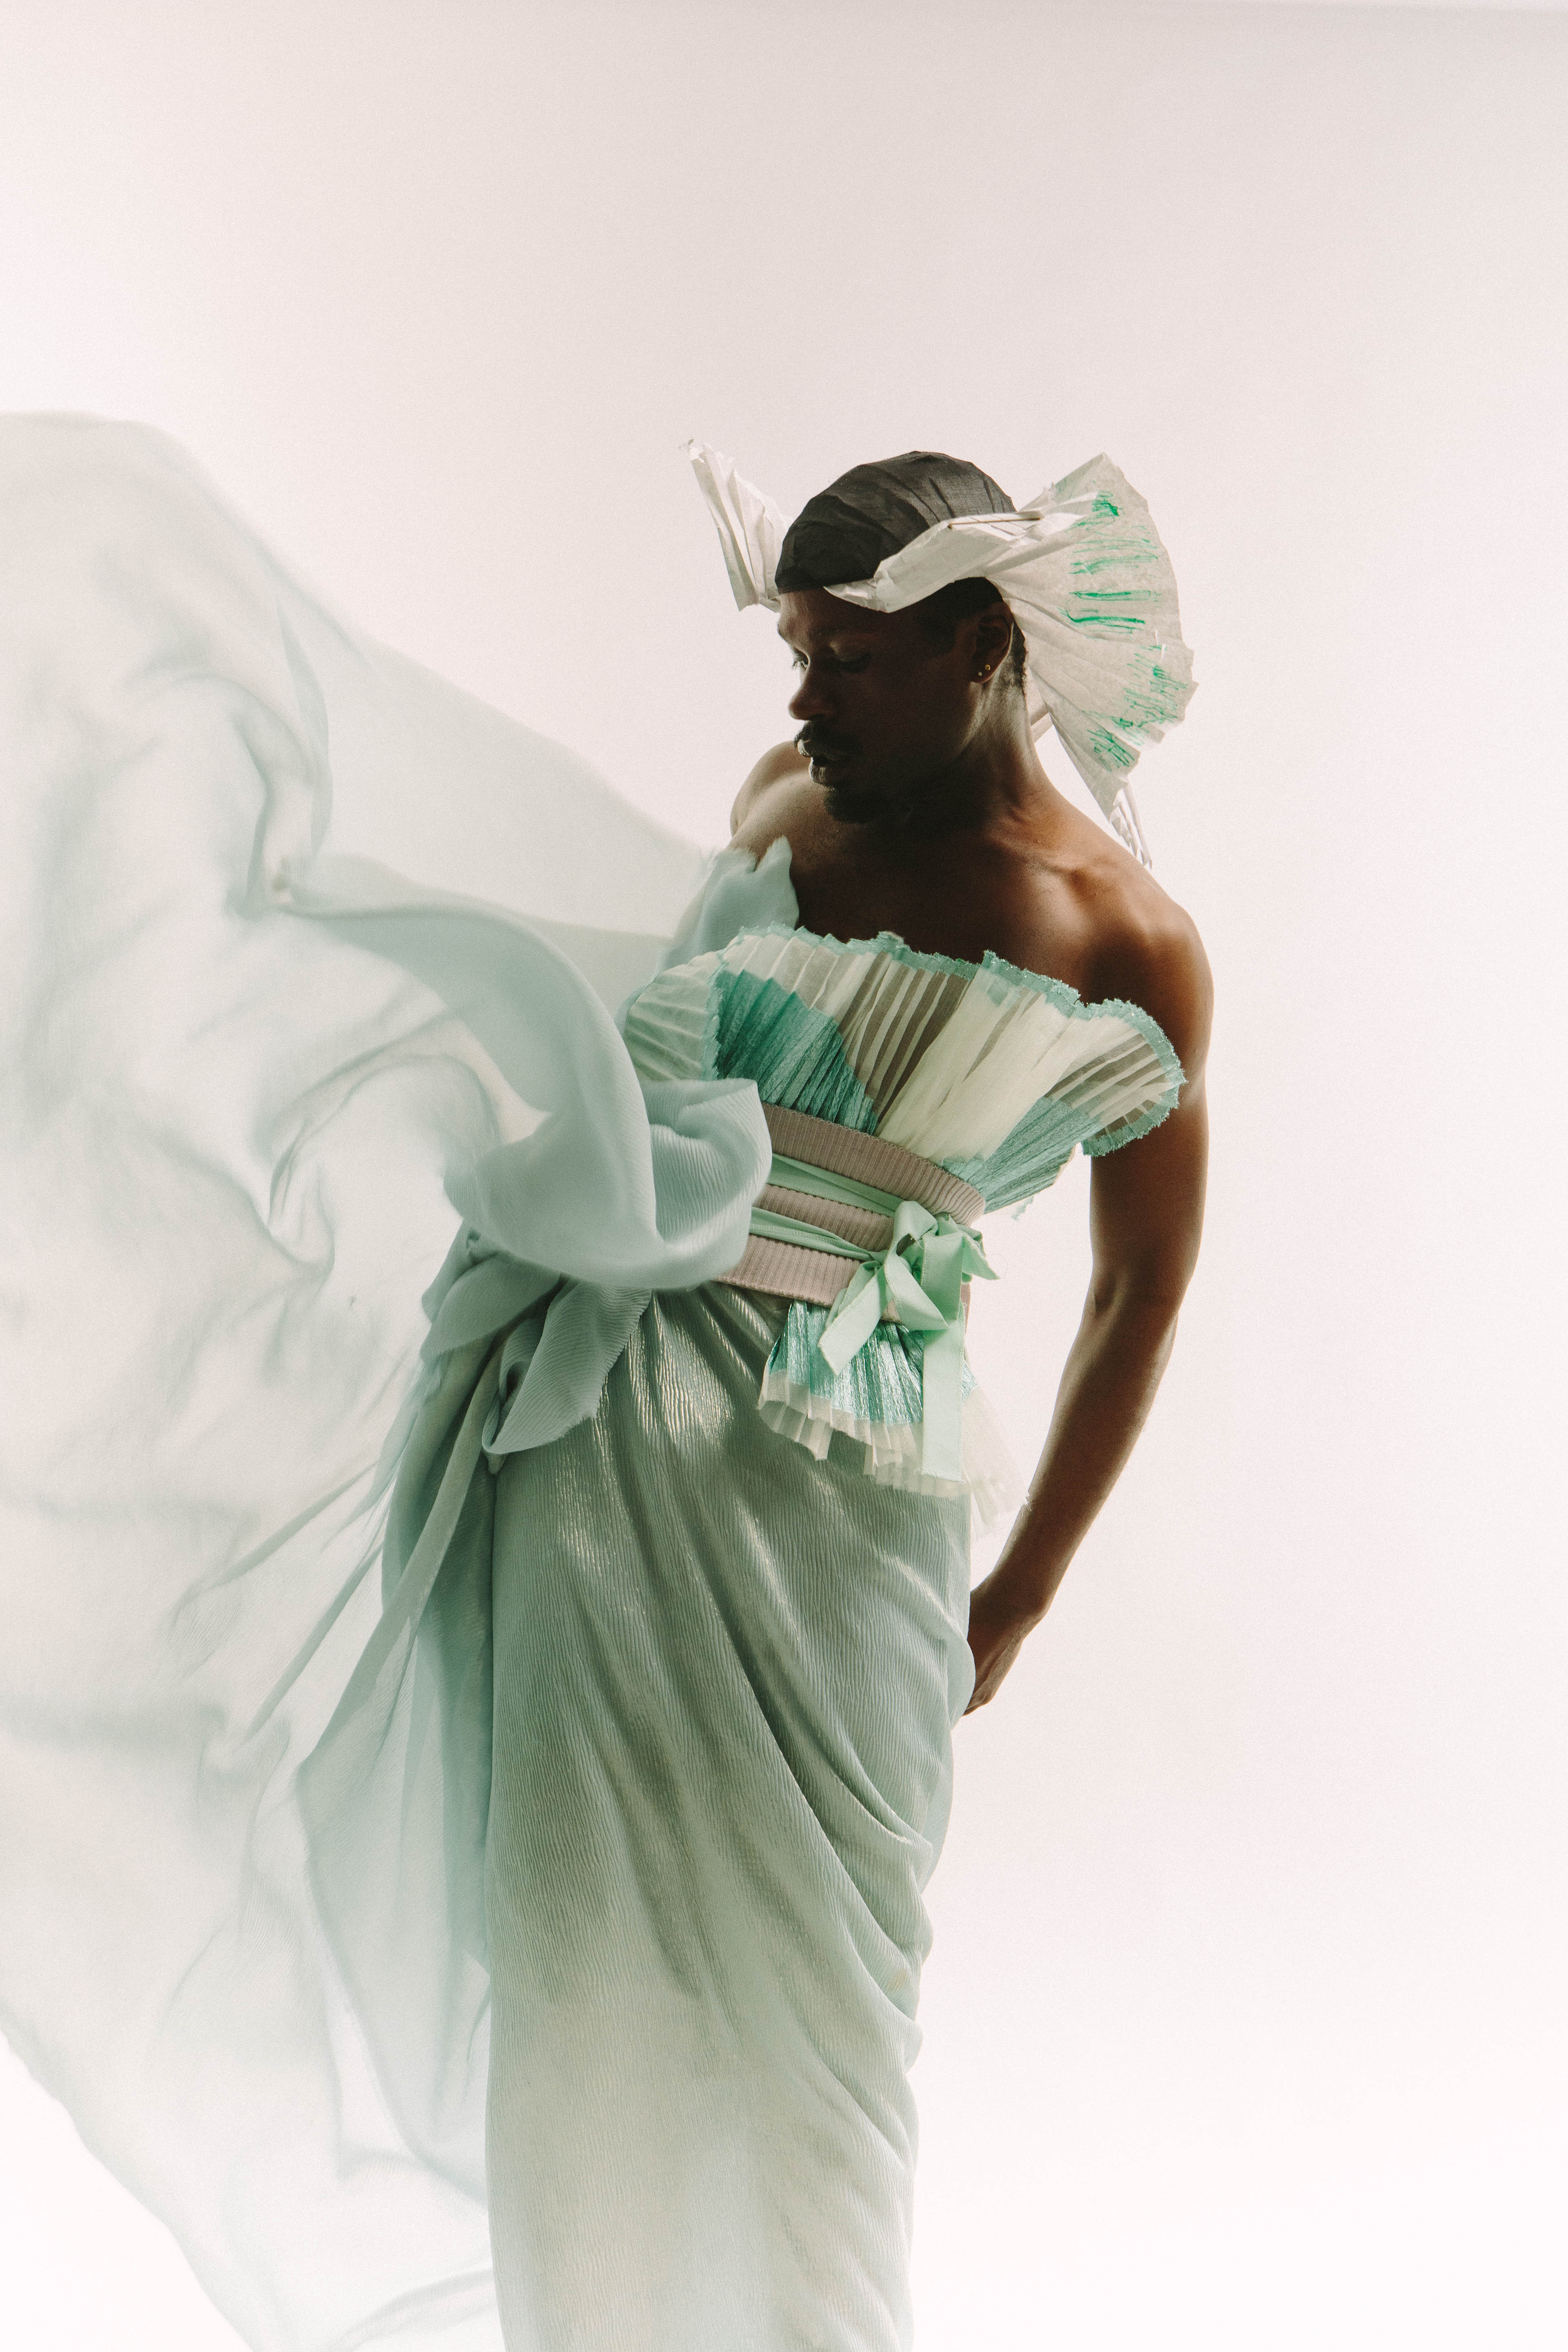 A Black model spins in a black and white pleated head wrap, with a blue, white, and silver-grey pleated strapless shirt tied with some ribbons. Translucent light green-blue fabric fans out to the model's right. The skirt of their outfit is made of a shimmery light green fabric with smaller pleats, and it drapes across their legs, against a white backdrop.